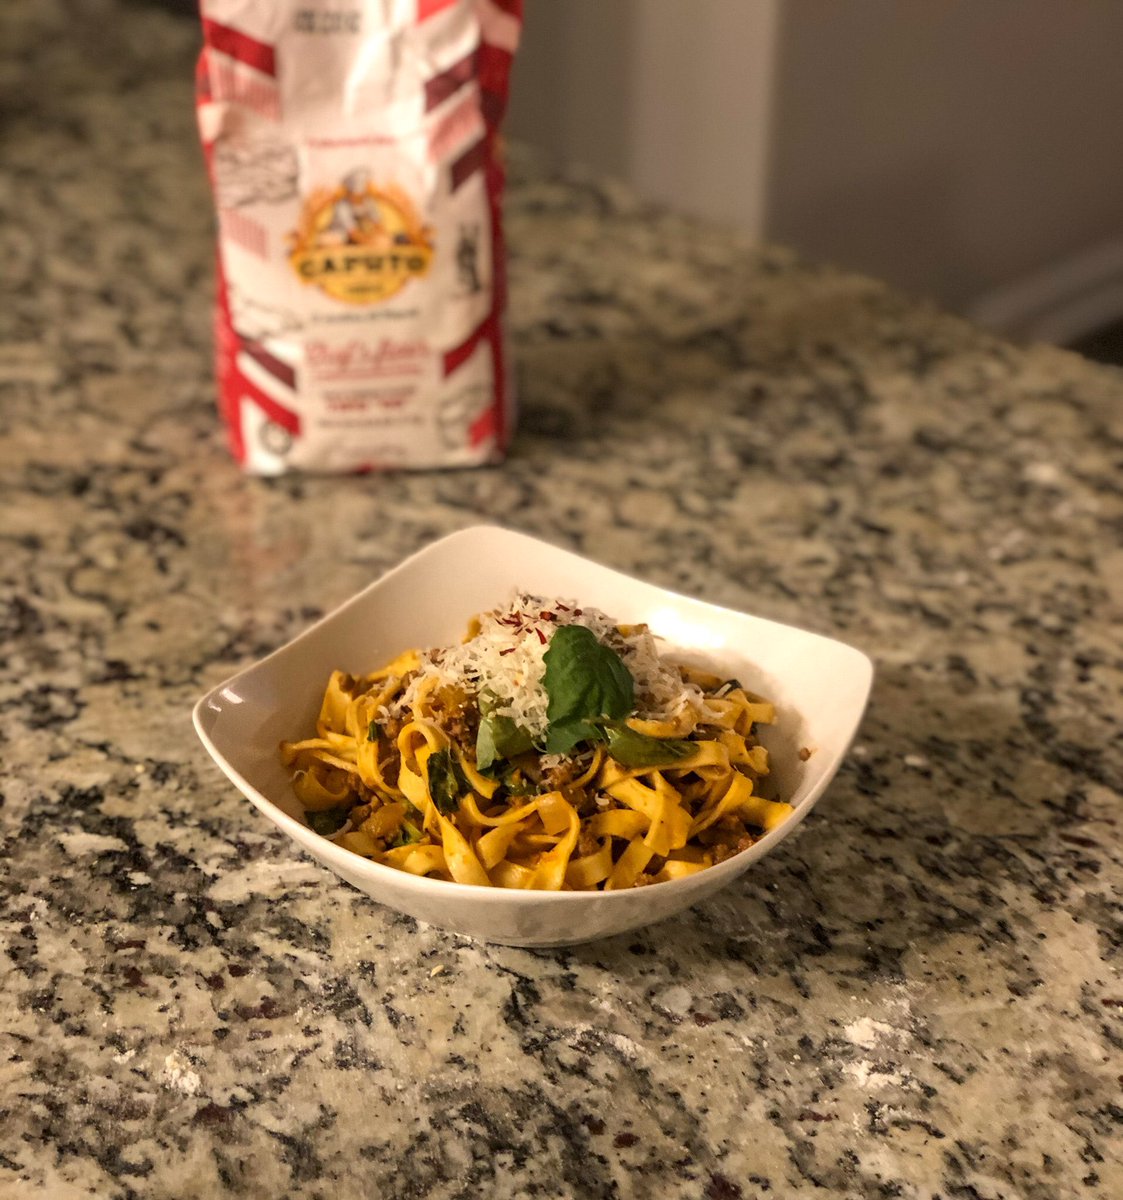 After a couple of long runs this weekend we deserved a night of carb loading with homemade pasta inspired, as always, by @pastagrannies